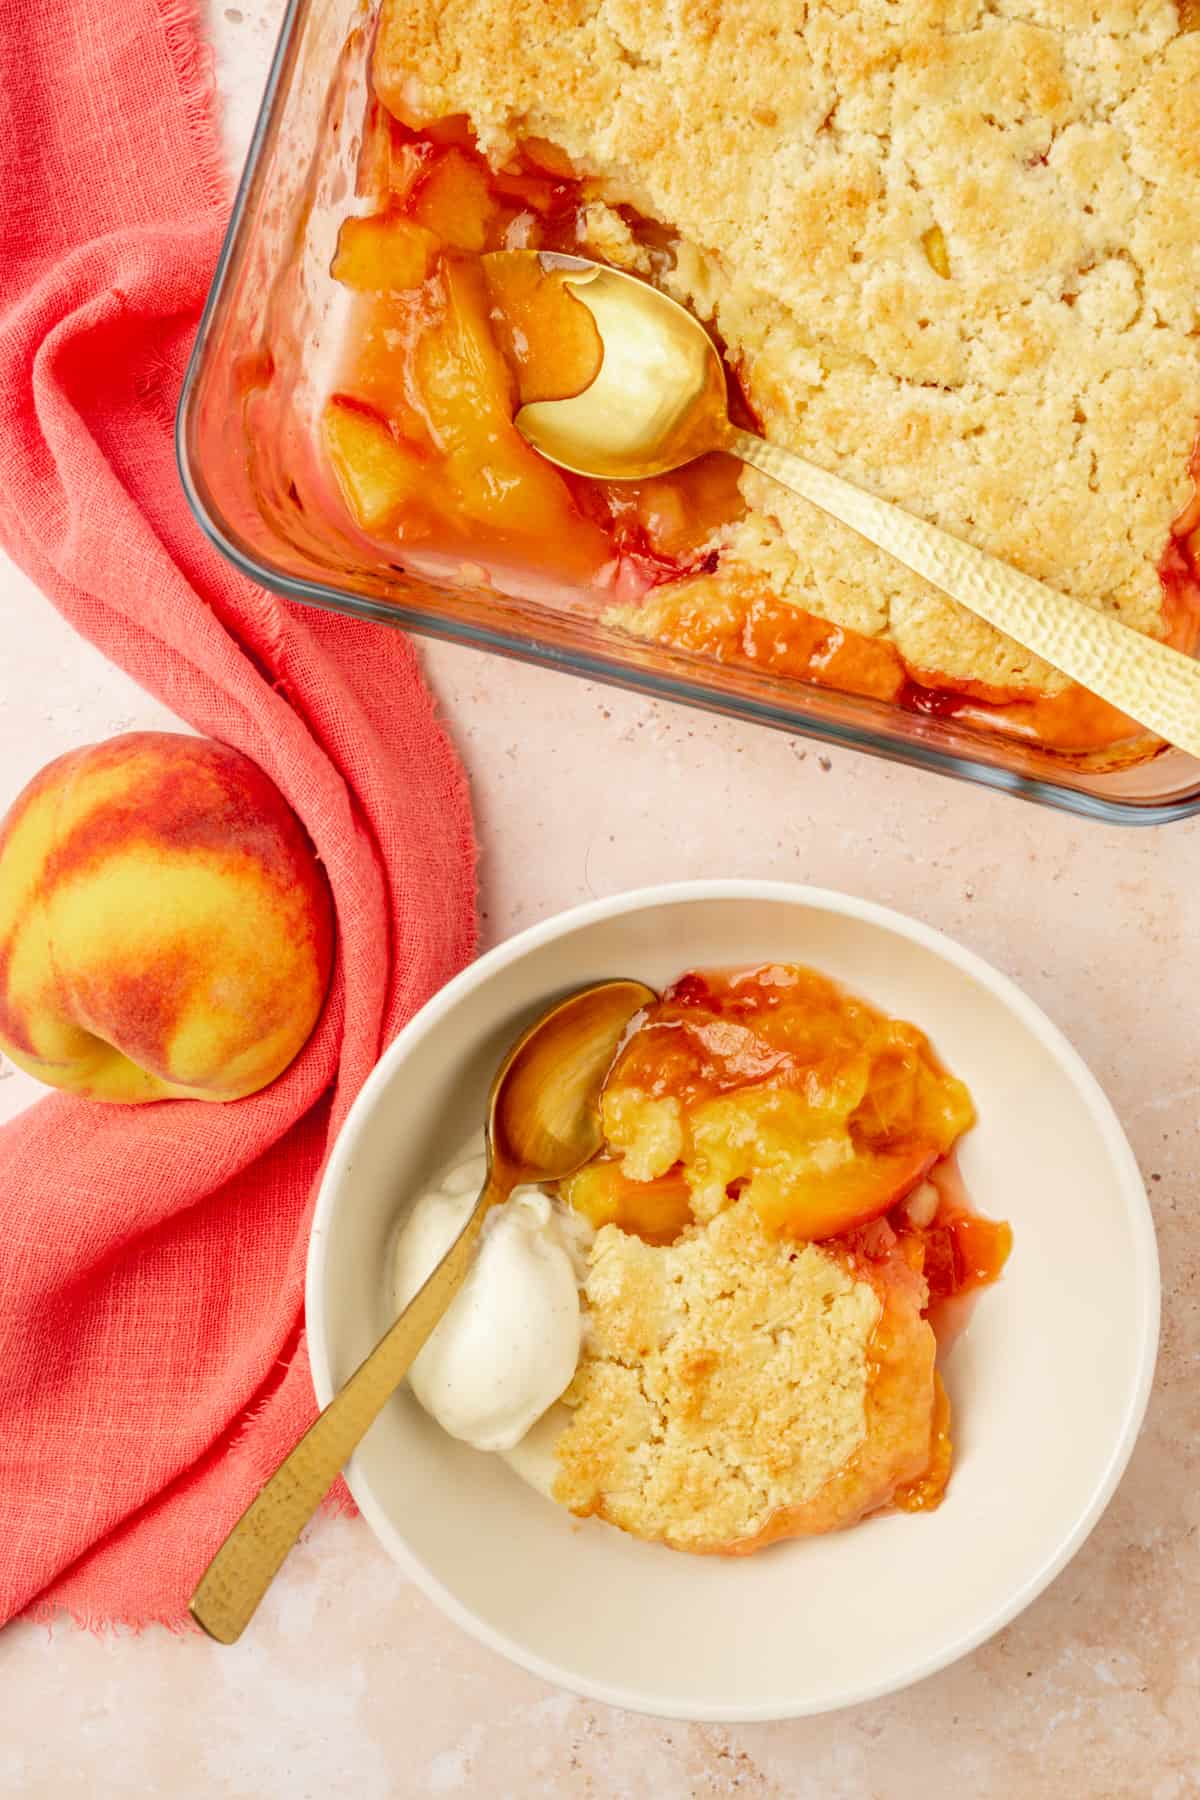 A dish of peach cobbler, next to a serving in a bowl and a pink napkin.